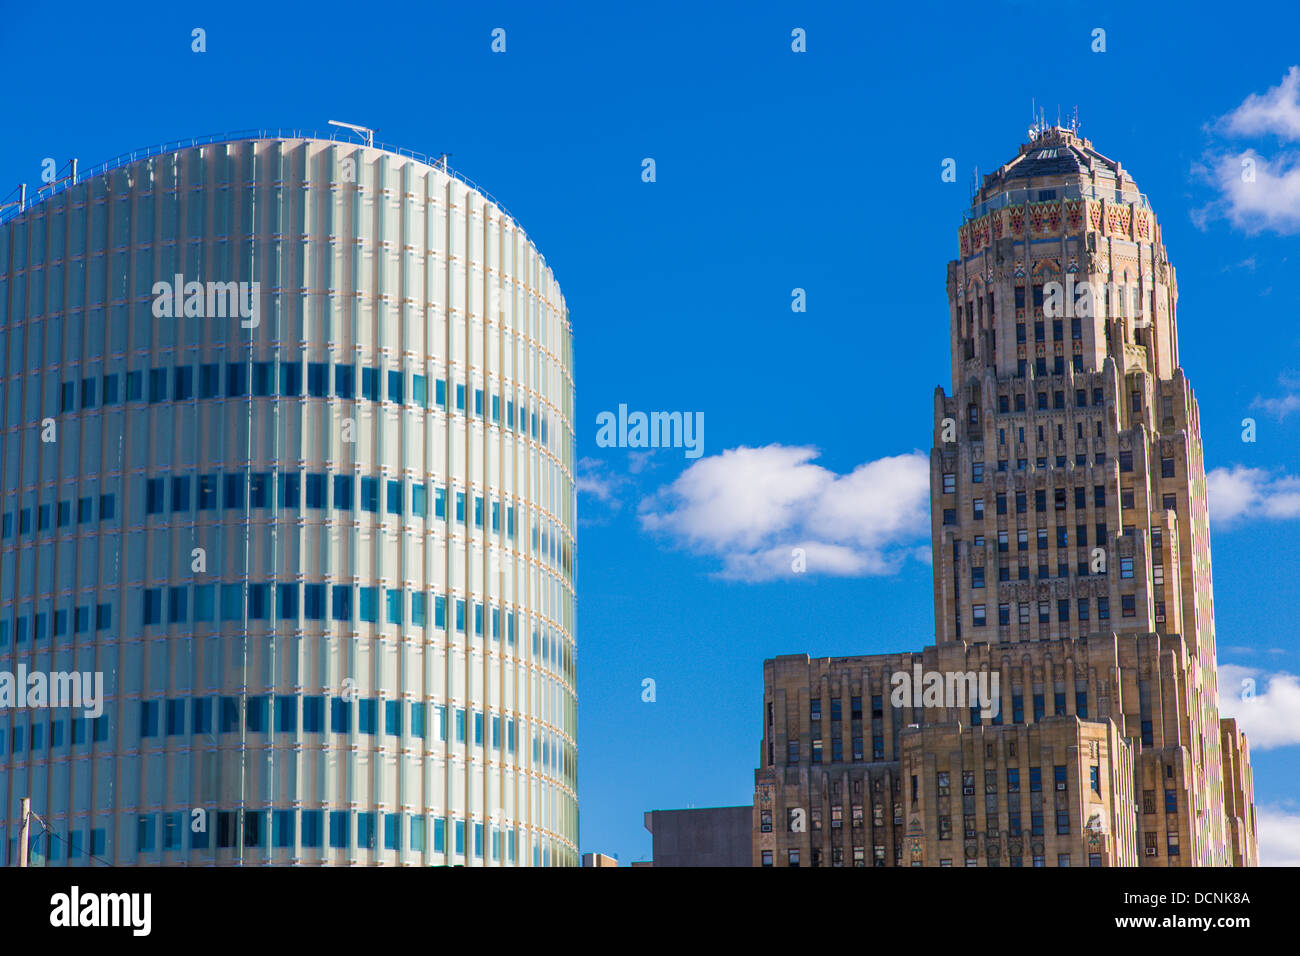 Old City Hall and new The Robert H. Jackson United States Courthouse in Buffalo New York, United States Stock Photo